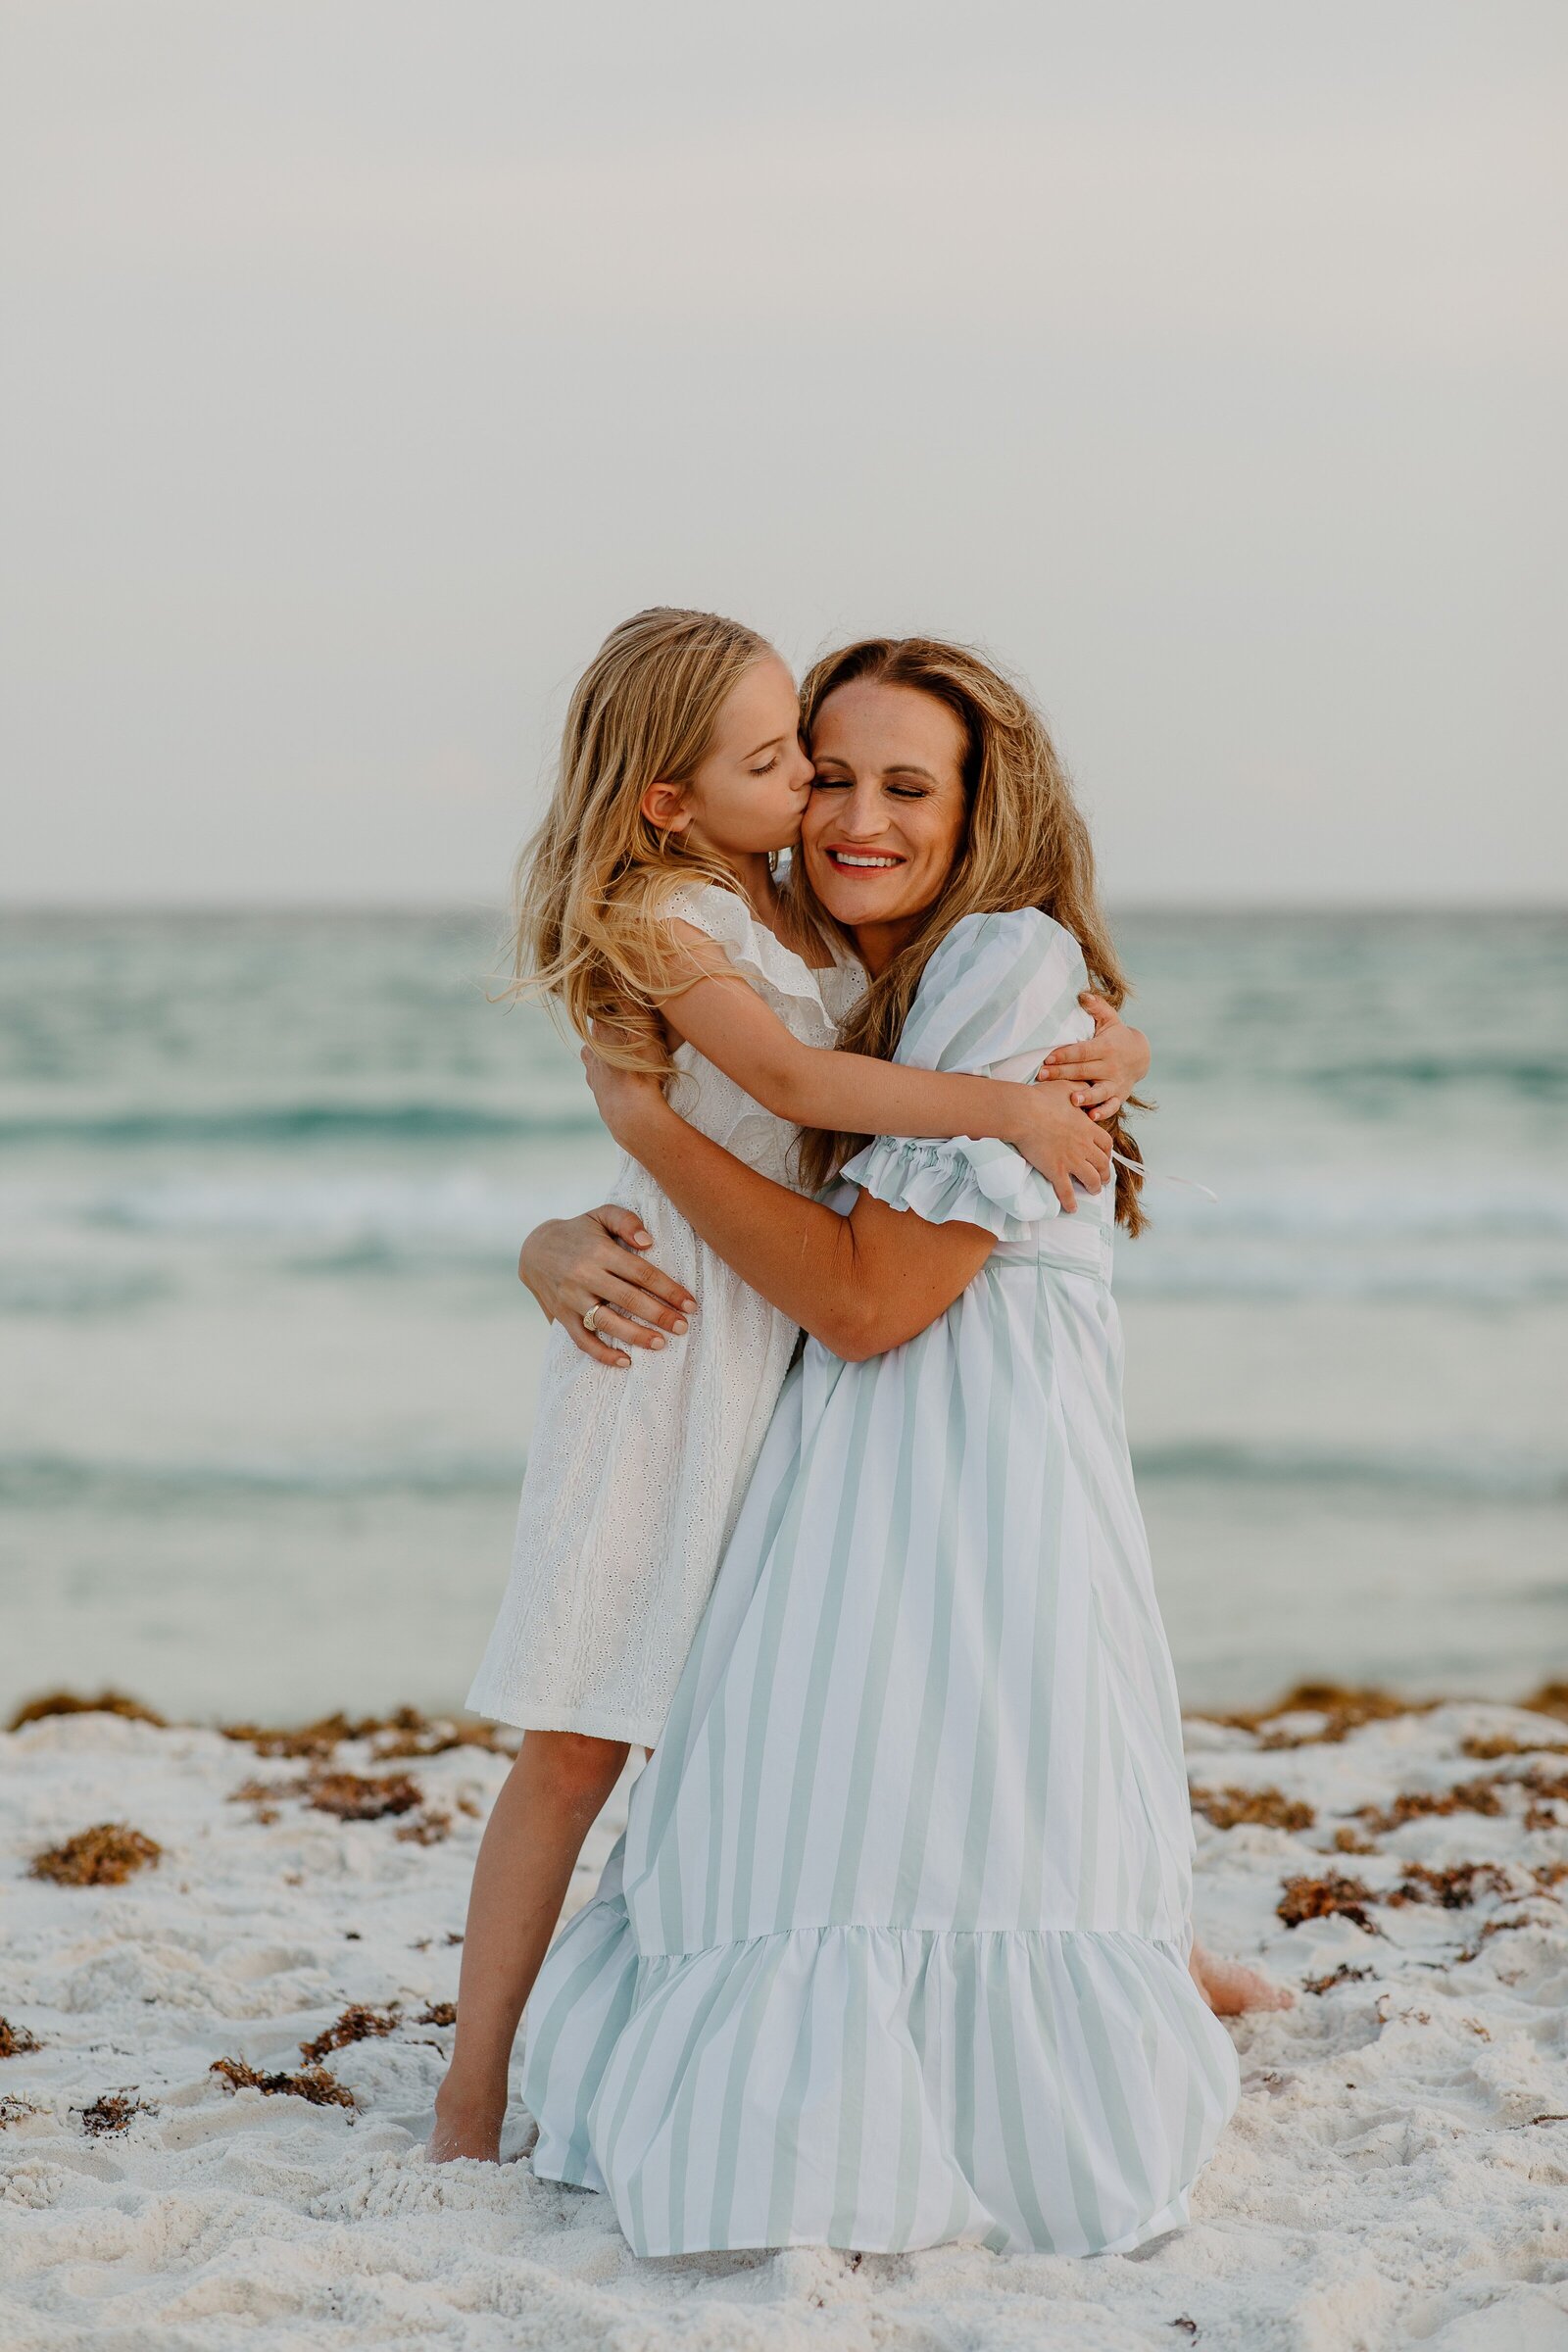 Pensacola Beach vacation family photography session .  Mother and daughter hugging on the beach.